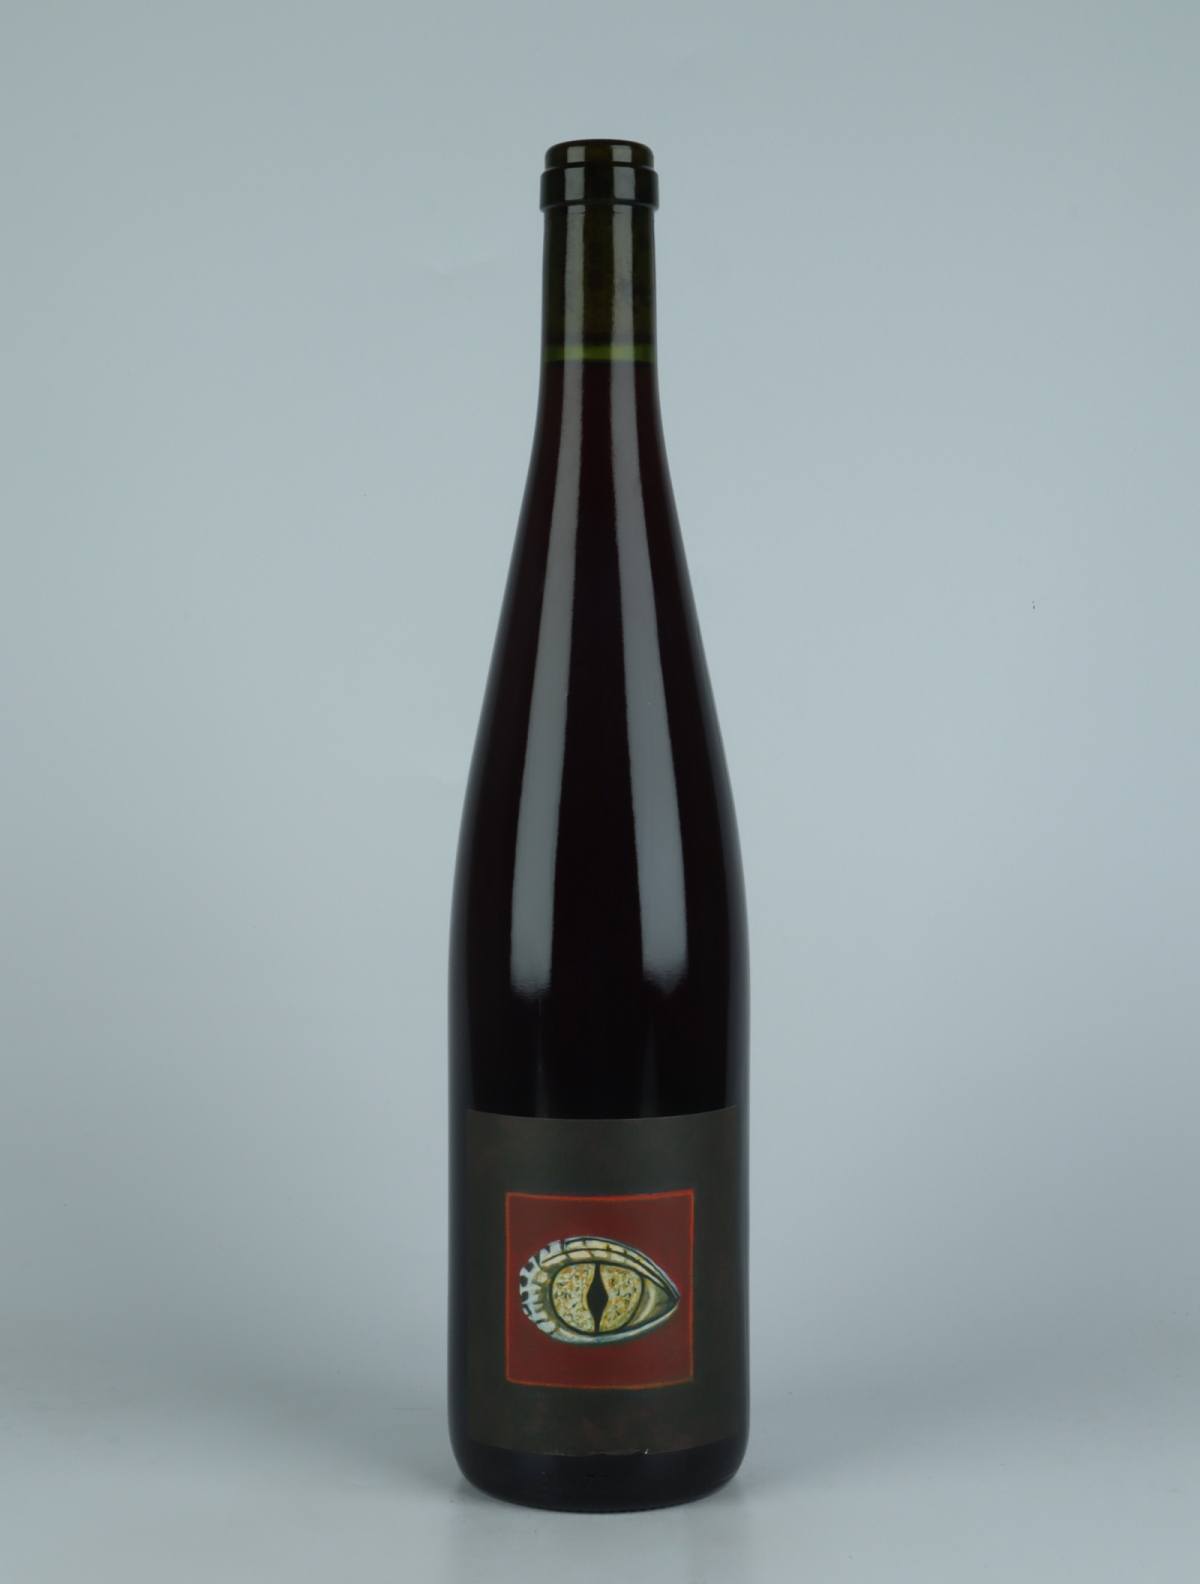 A bottle 2022 Pinot Noir - Vieille Vigne Red wine from Domaine Rietsch, Alsace in France